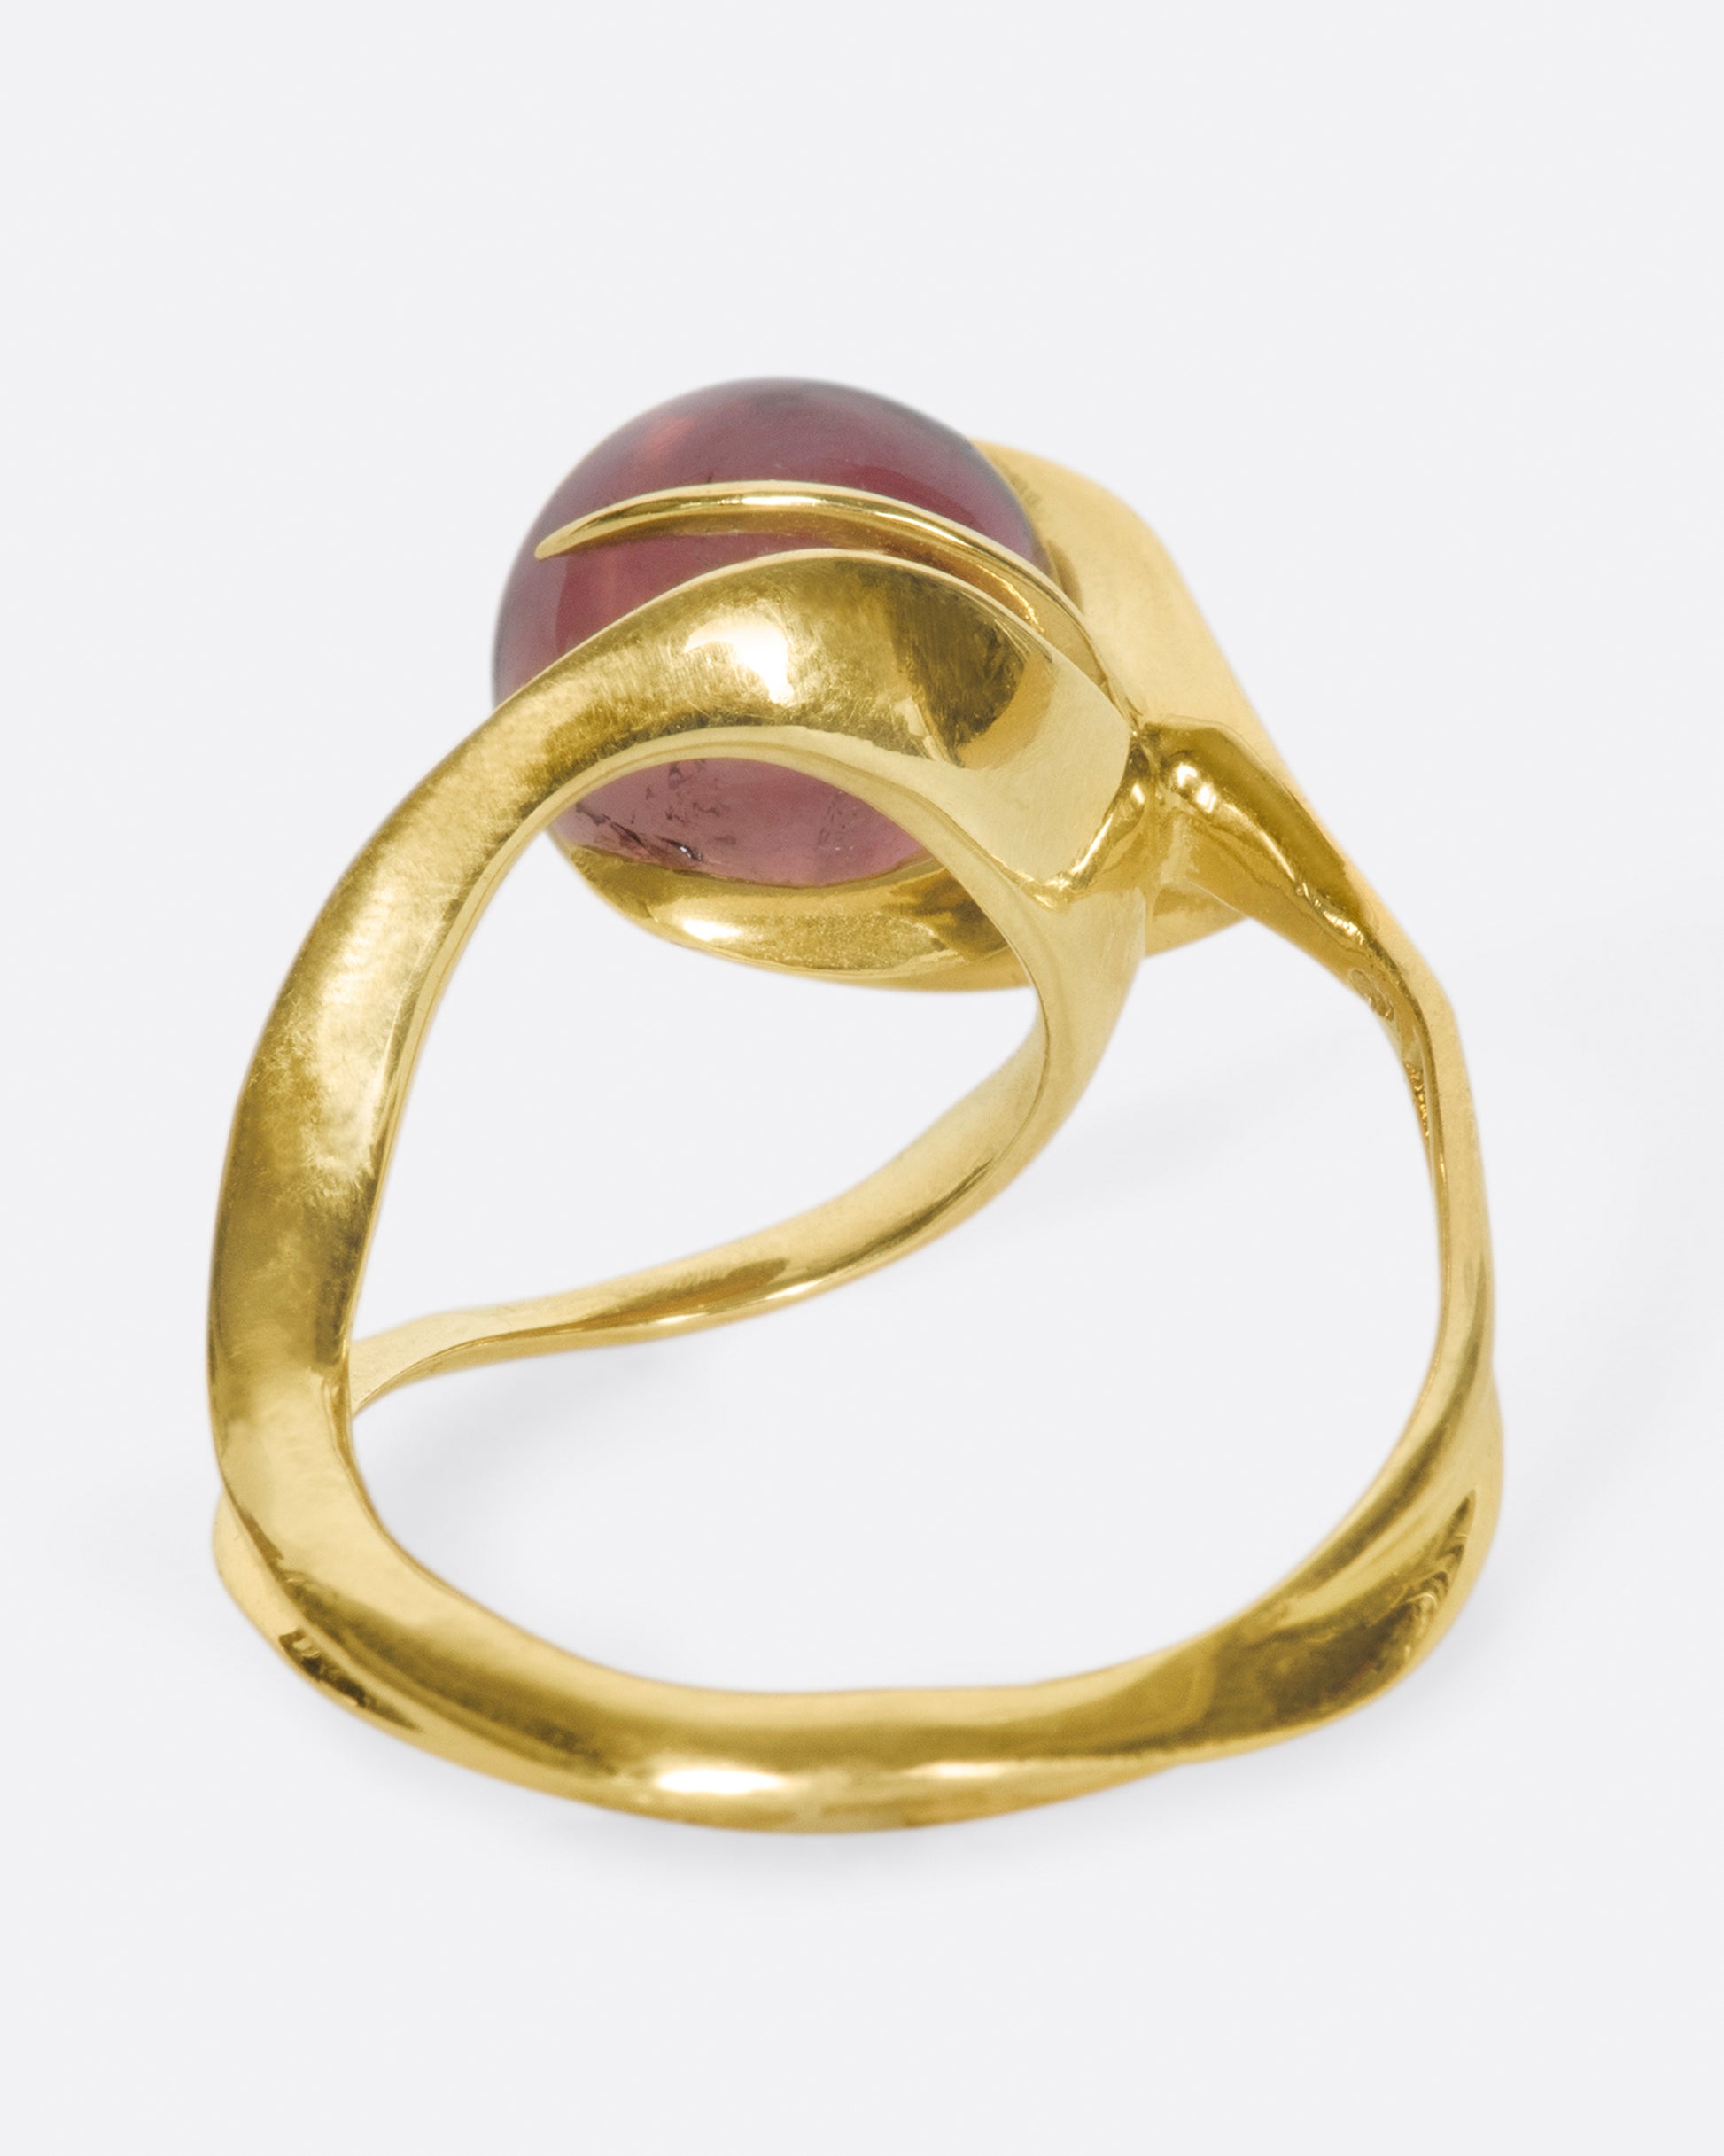 This ring is somehow substantial and airy, intricate and simple.